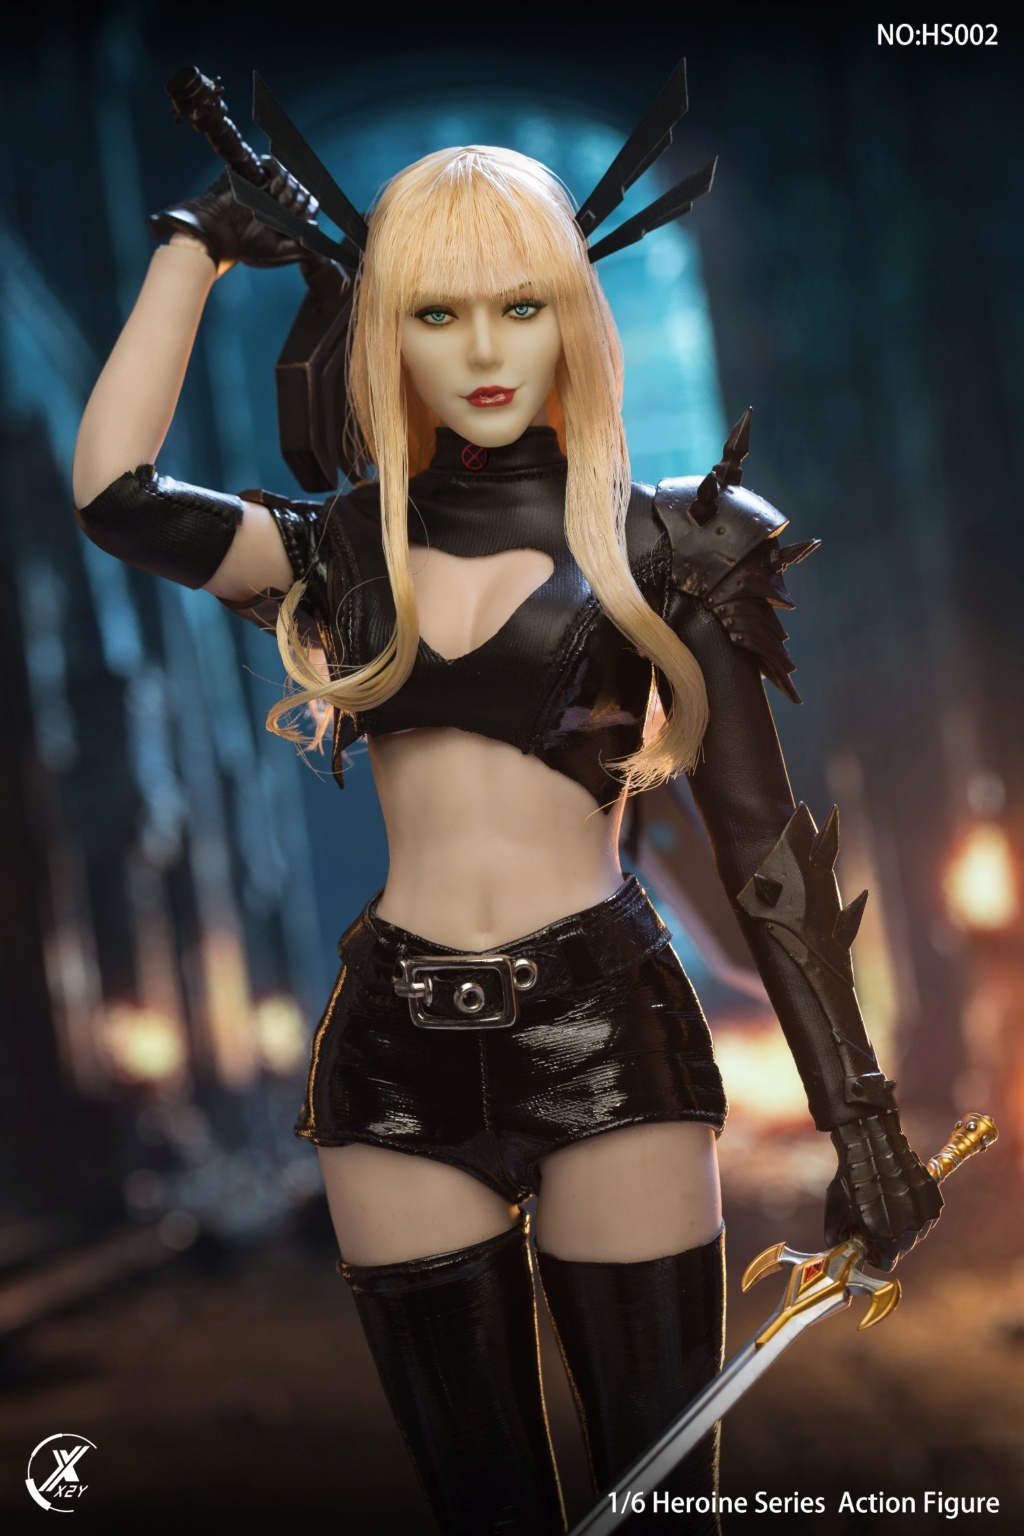 HeroineSeries - NEW PRODUCT: X2Y TOYS: 1/6 Heroine Series - Mysterious Female Warrior from Hell Double-Headed Female Doll # HS002 11195511